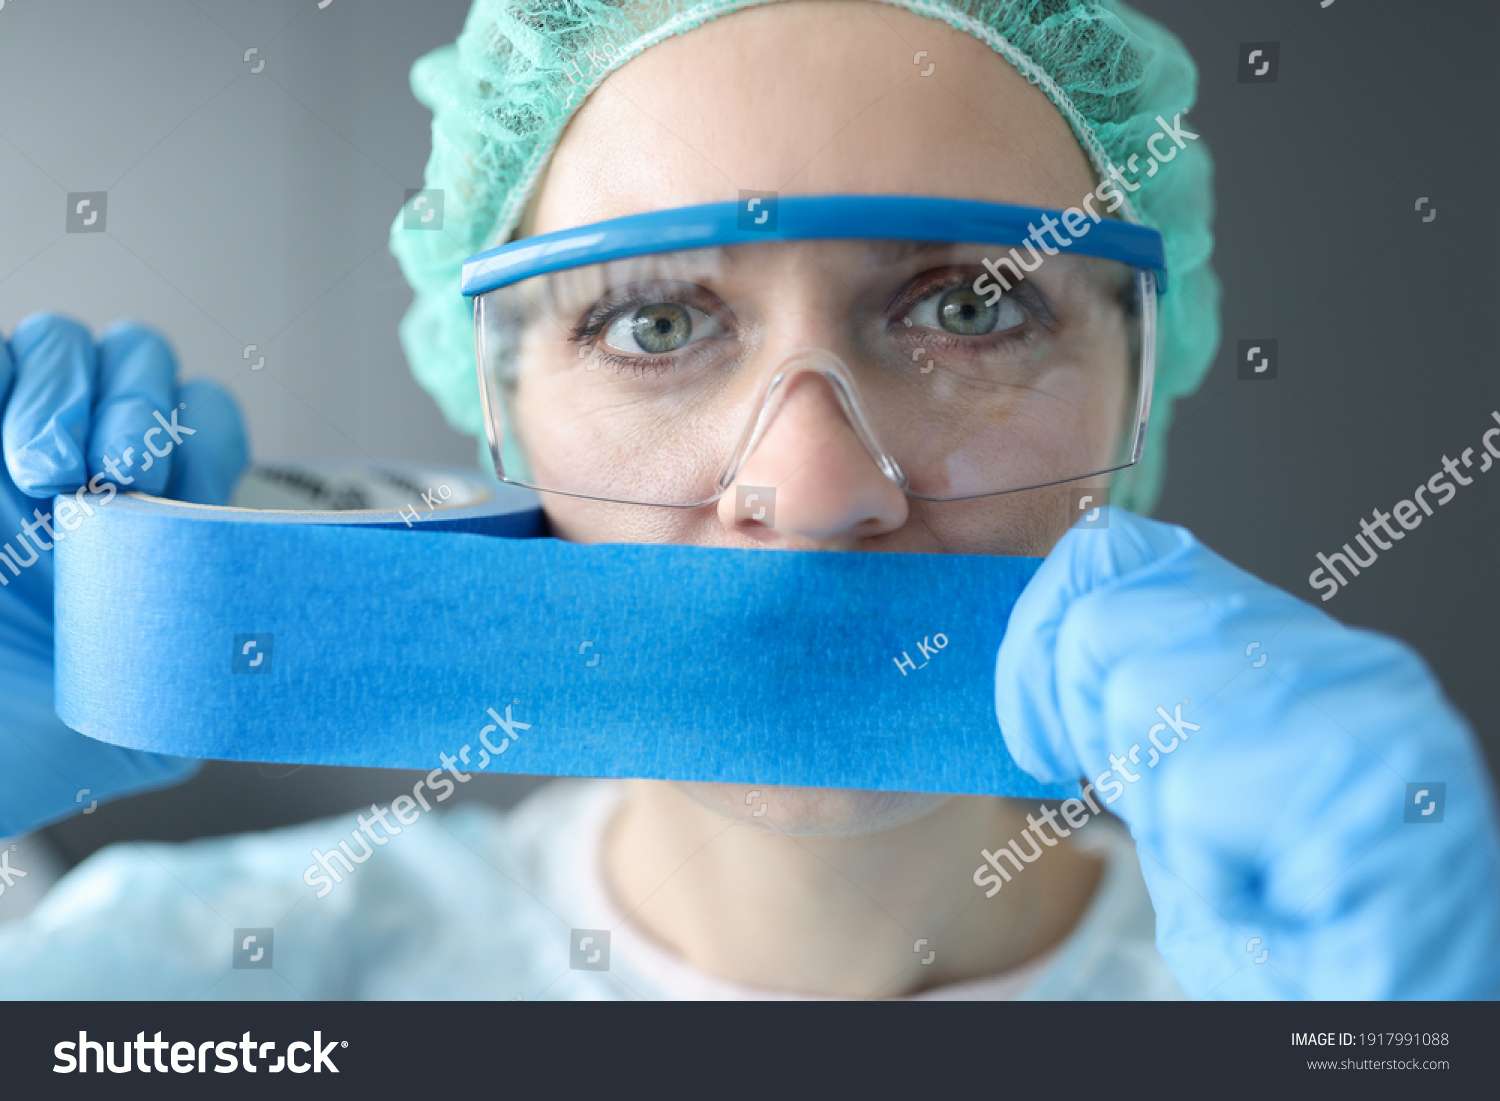 Woman doctor sealing her mouth with blue tape. Medical secrecy concept #1917991088